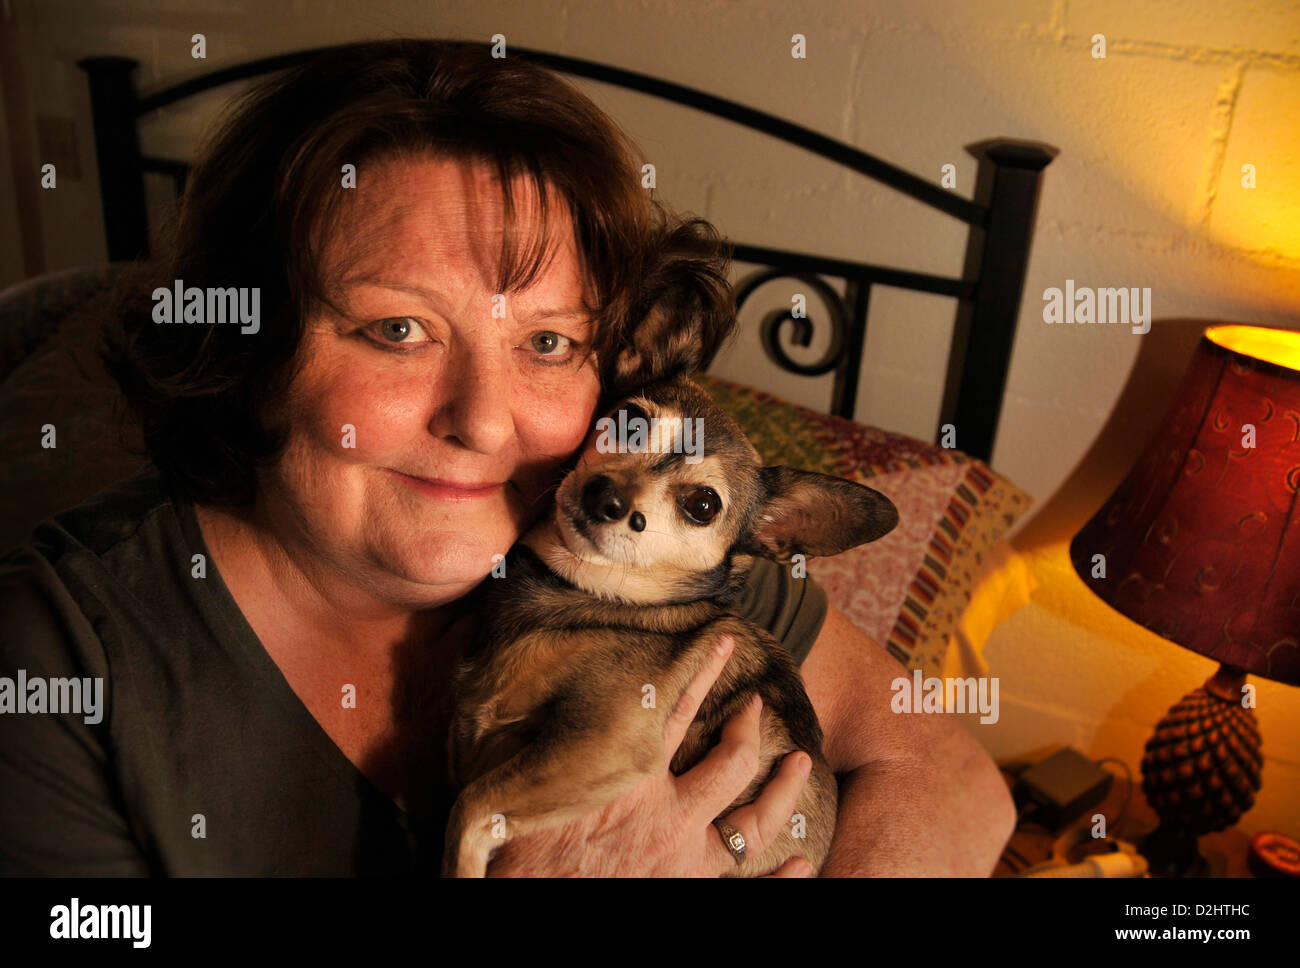 A chronically ill senior patient holds her pet dog. Stock Photo